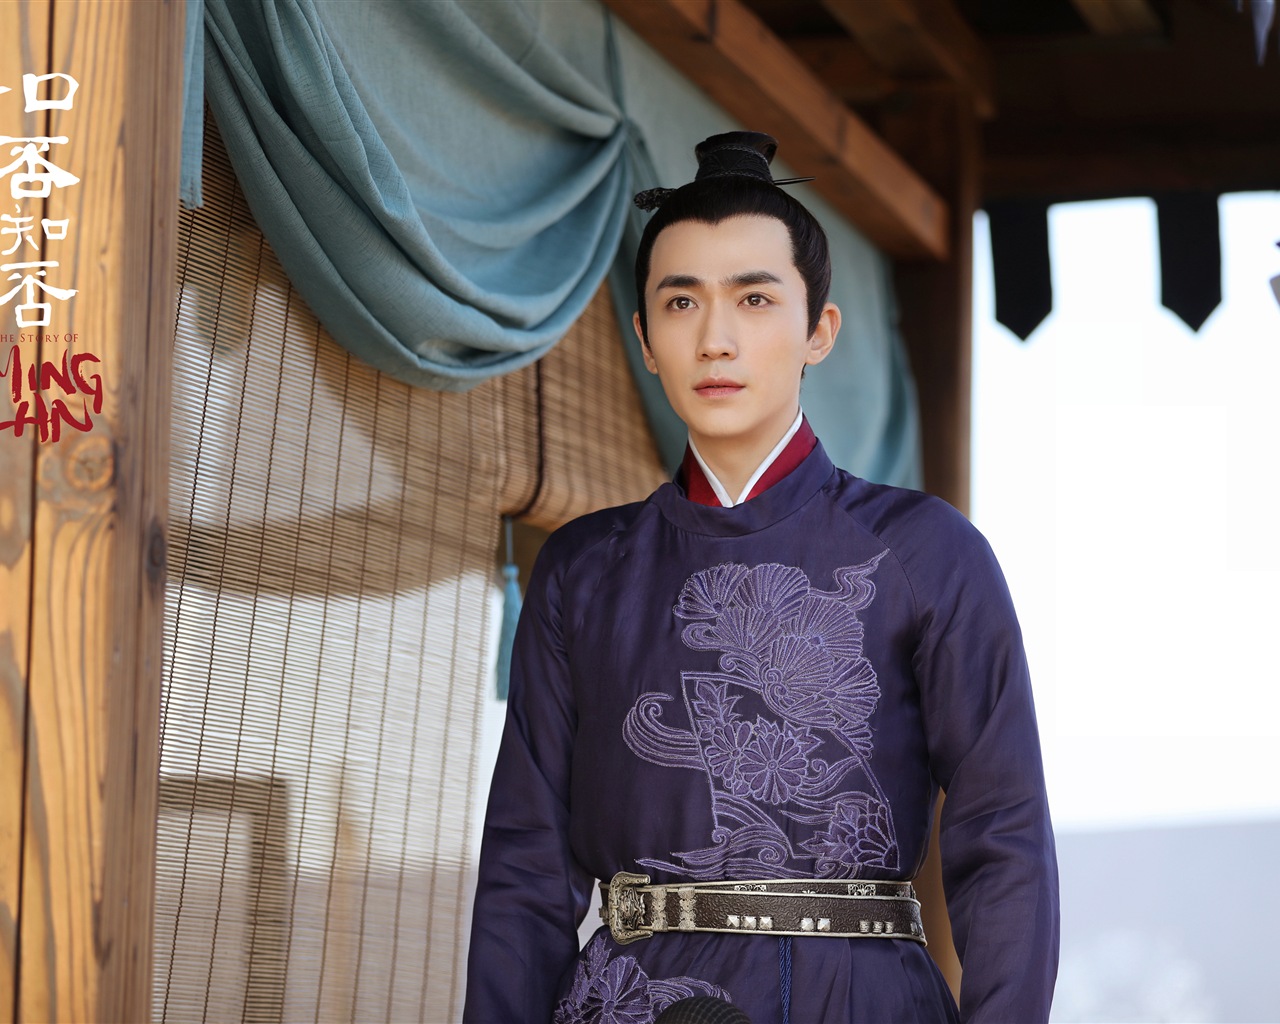 The Story Of MingLan, TV series HD wallpapers #24 - 1280x1024